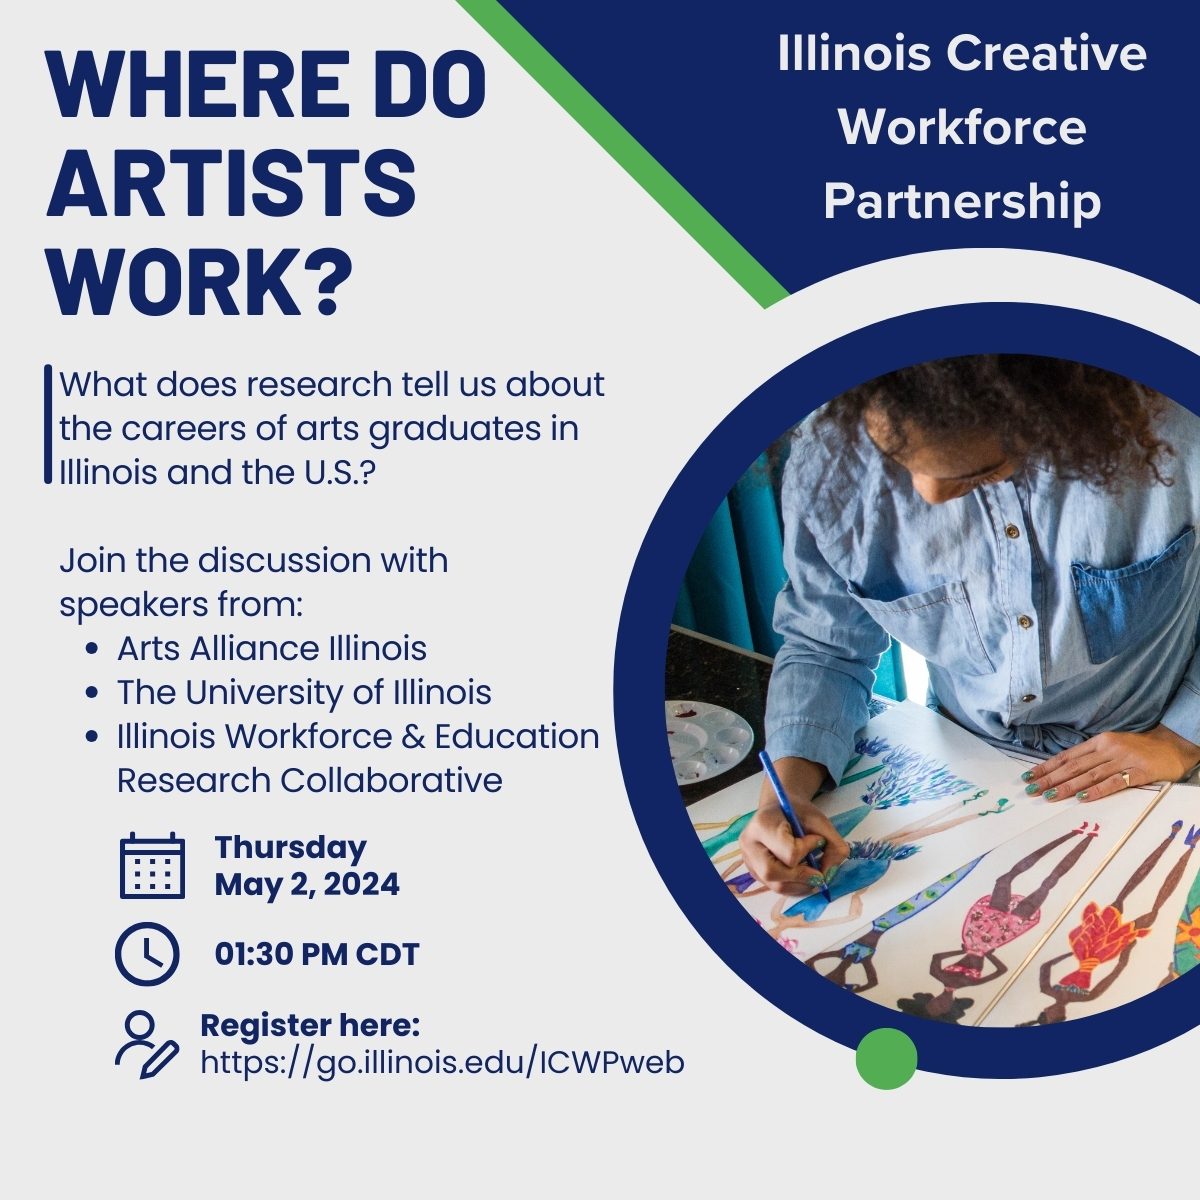 Do artists work beyond creative fields? We use U.S. Census data to see where arts grads work, showing many work outside arts and design. Join the discussion tomorrow! Register here: go.illinois.edu/ICWPweb